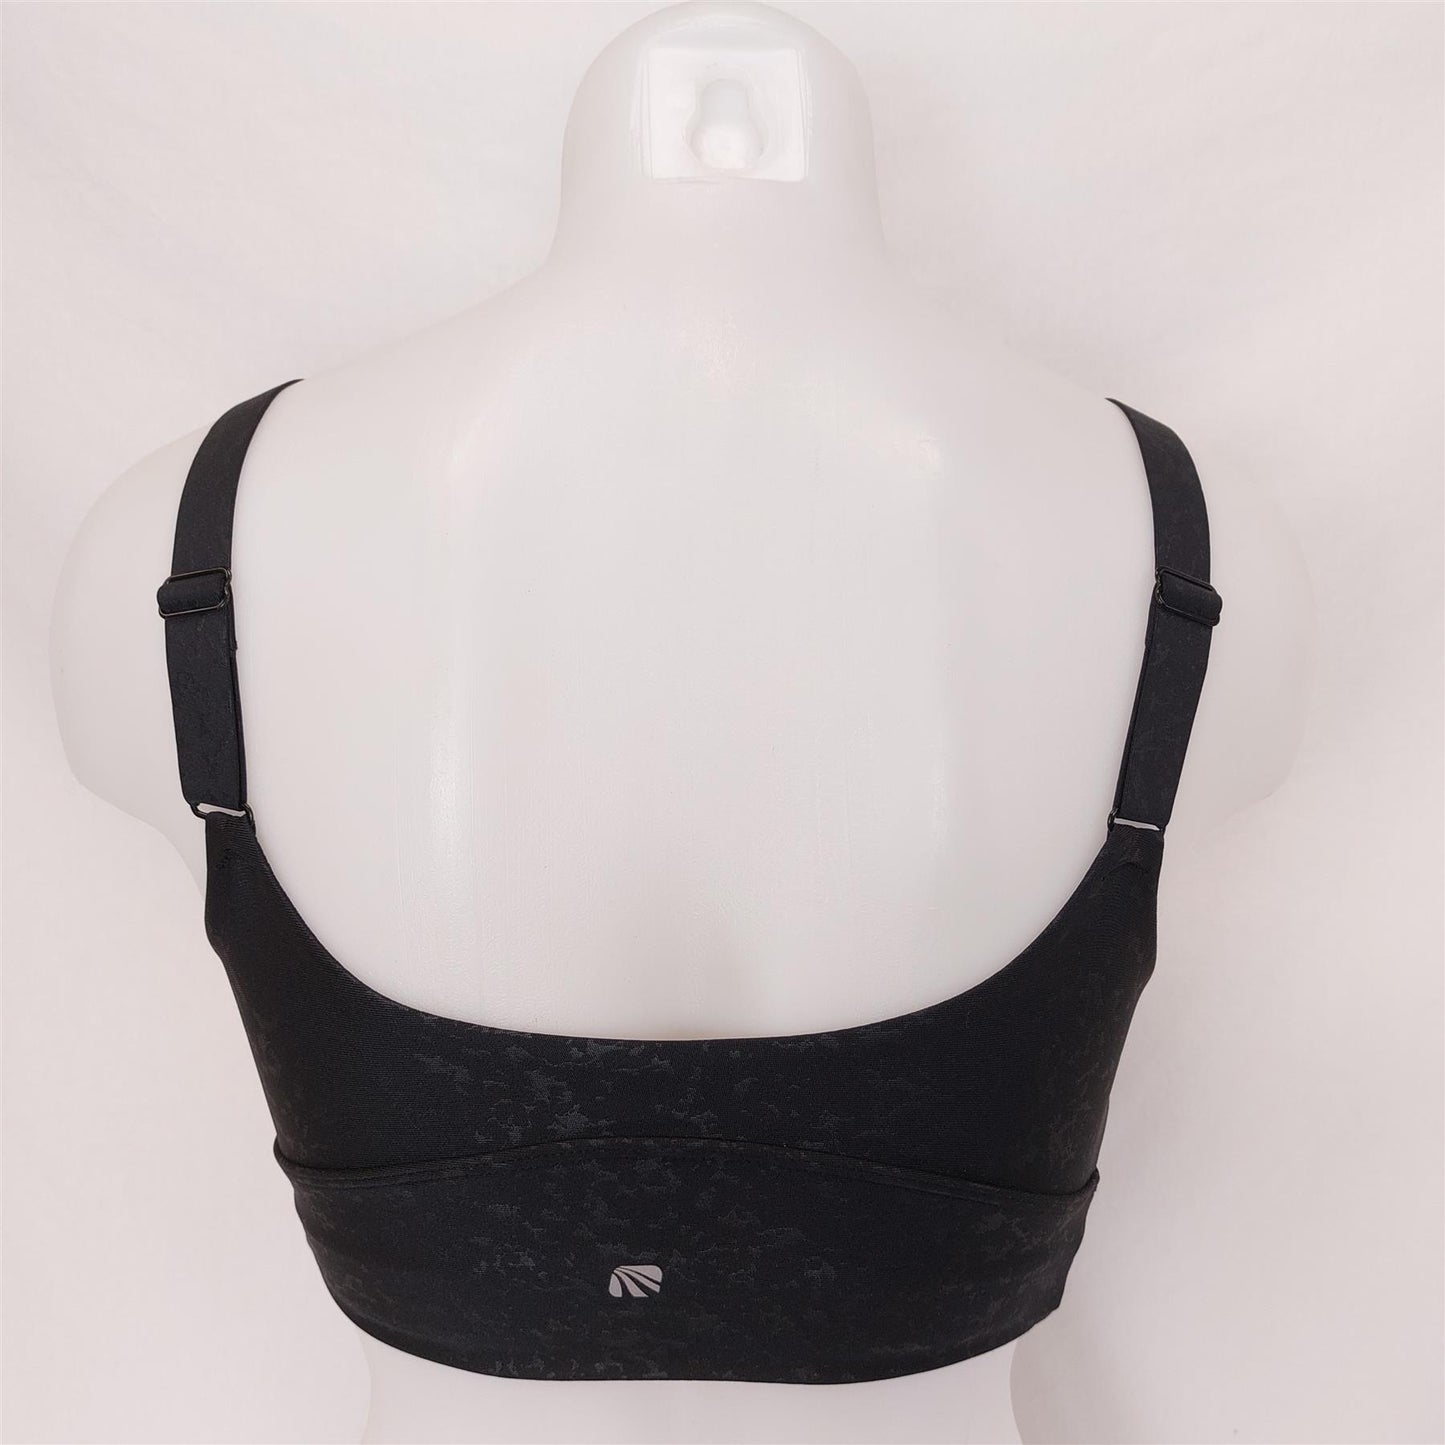 Marika Gym Sports Bra High Impact Non-Wired Removable Padding Black Embossed